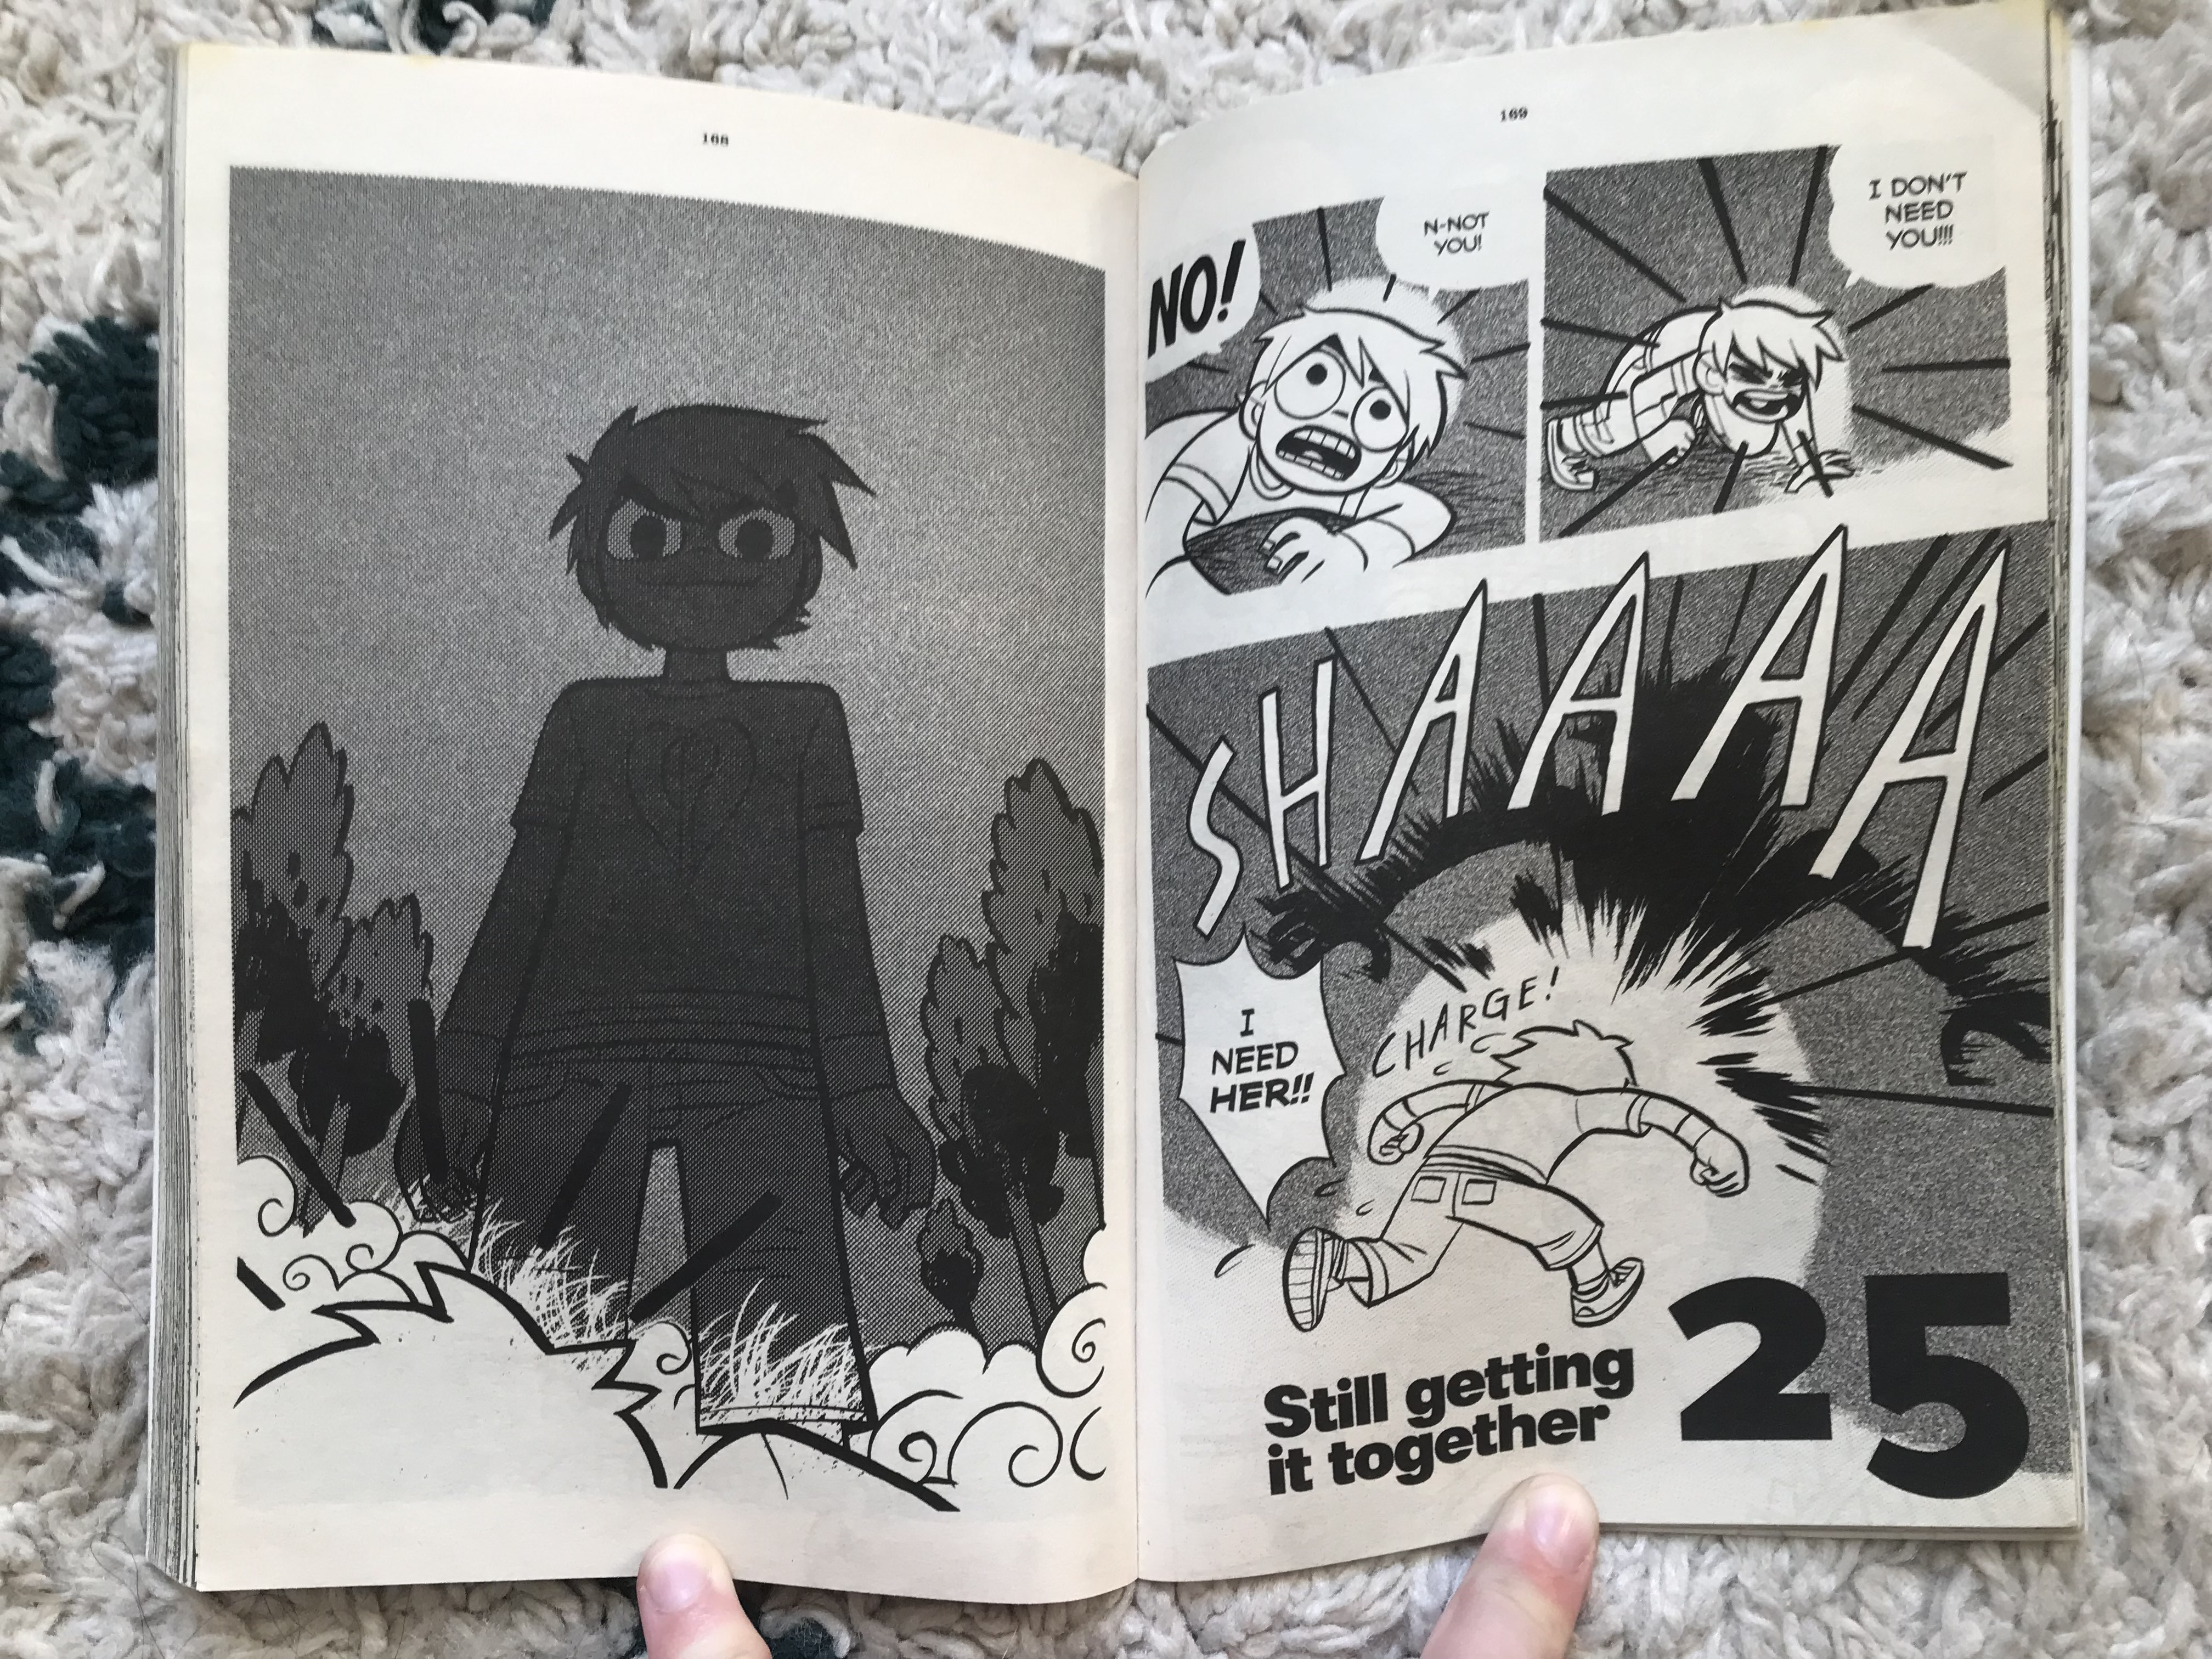 A photo of two pages from Scott Pilgrim, showing NegaScott appearing, Scott saying he doesn't need him, and running away.